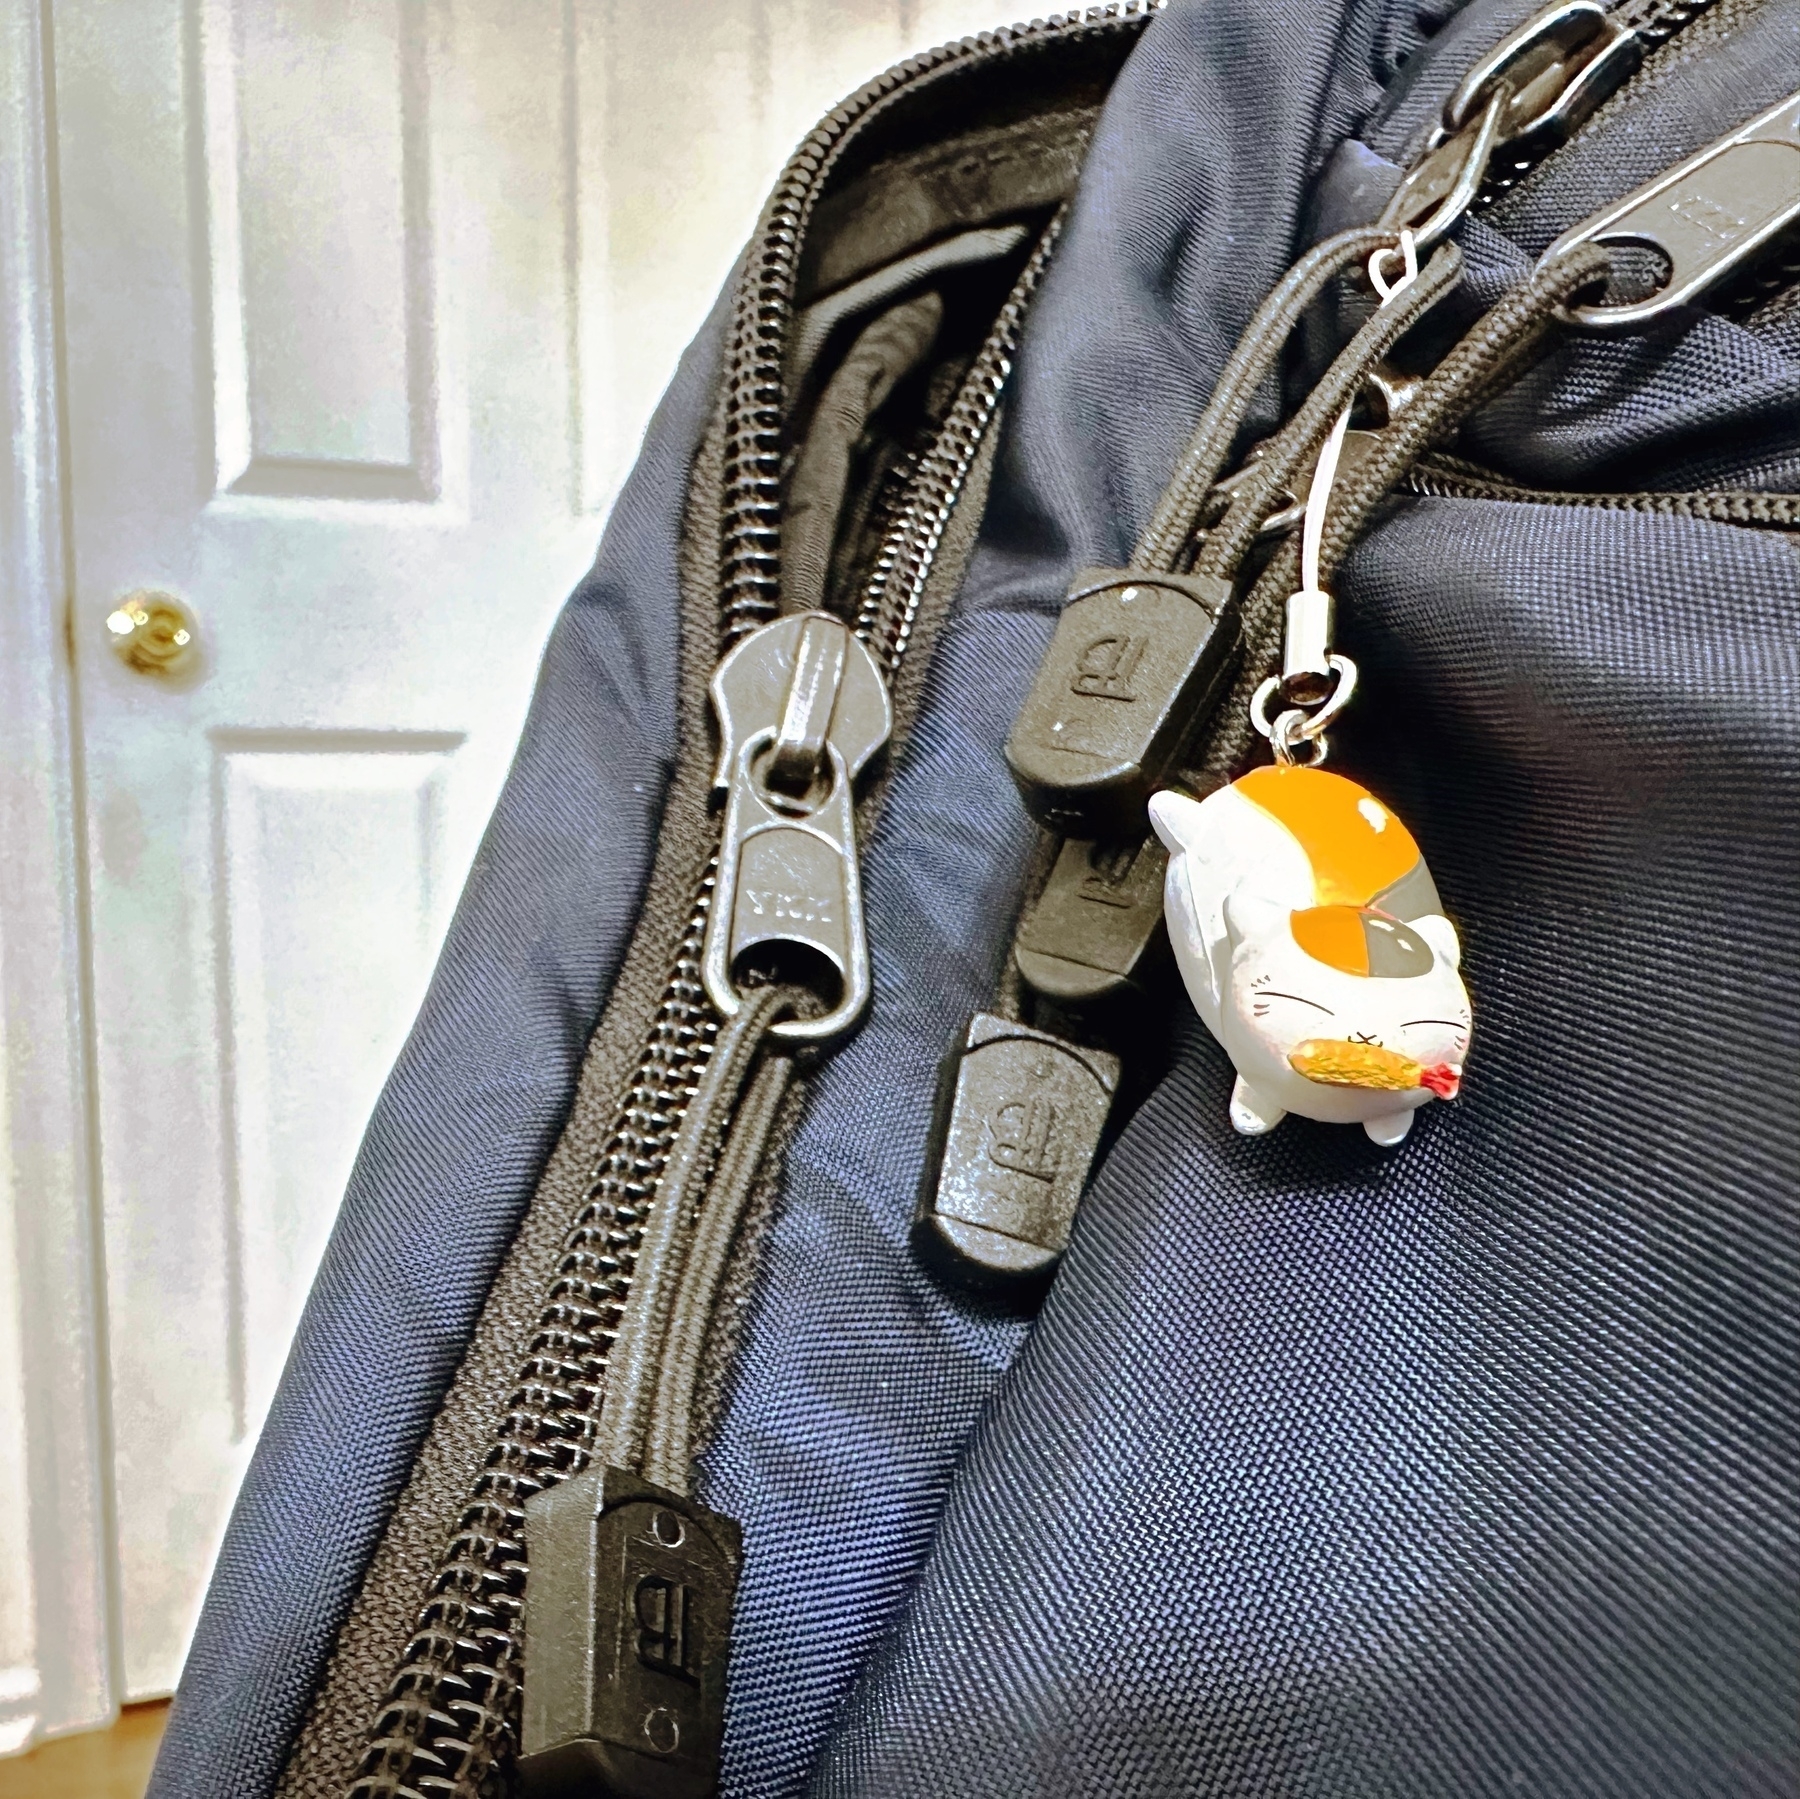 Closeup of backpack with charm of cartoon cat eating sushi attached